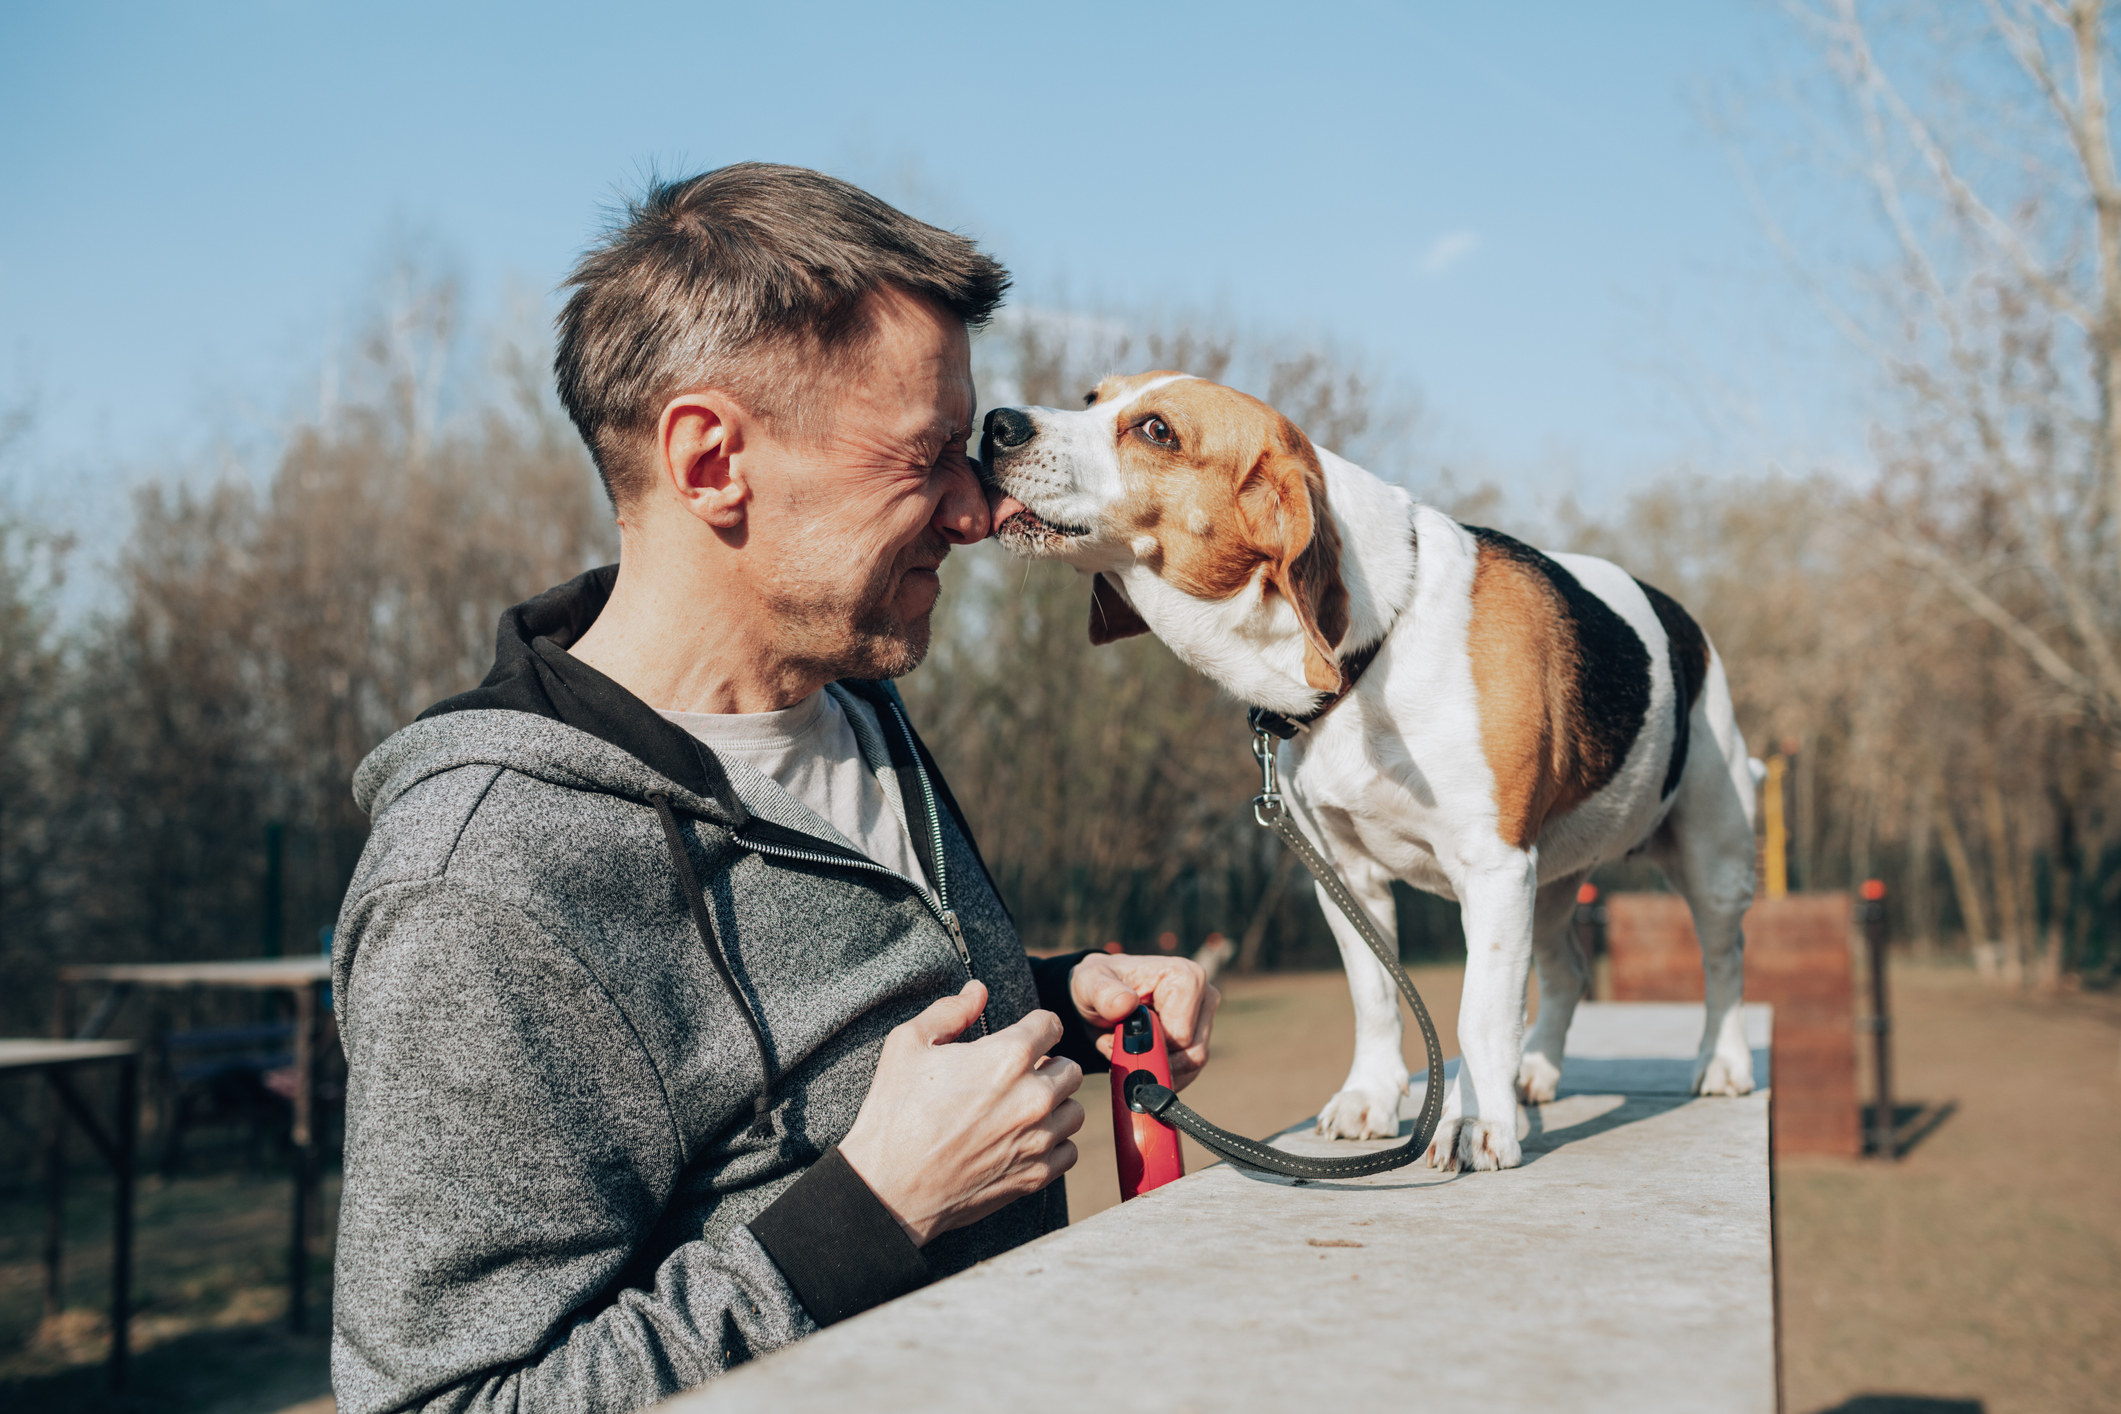 Beagle licking its owner.